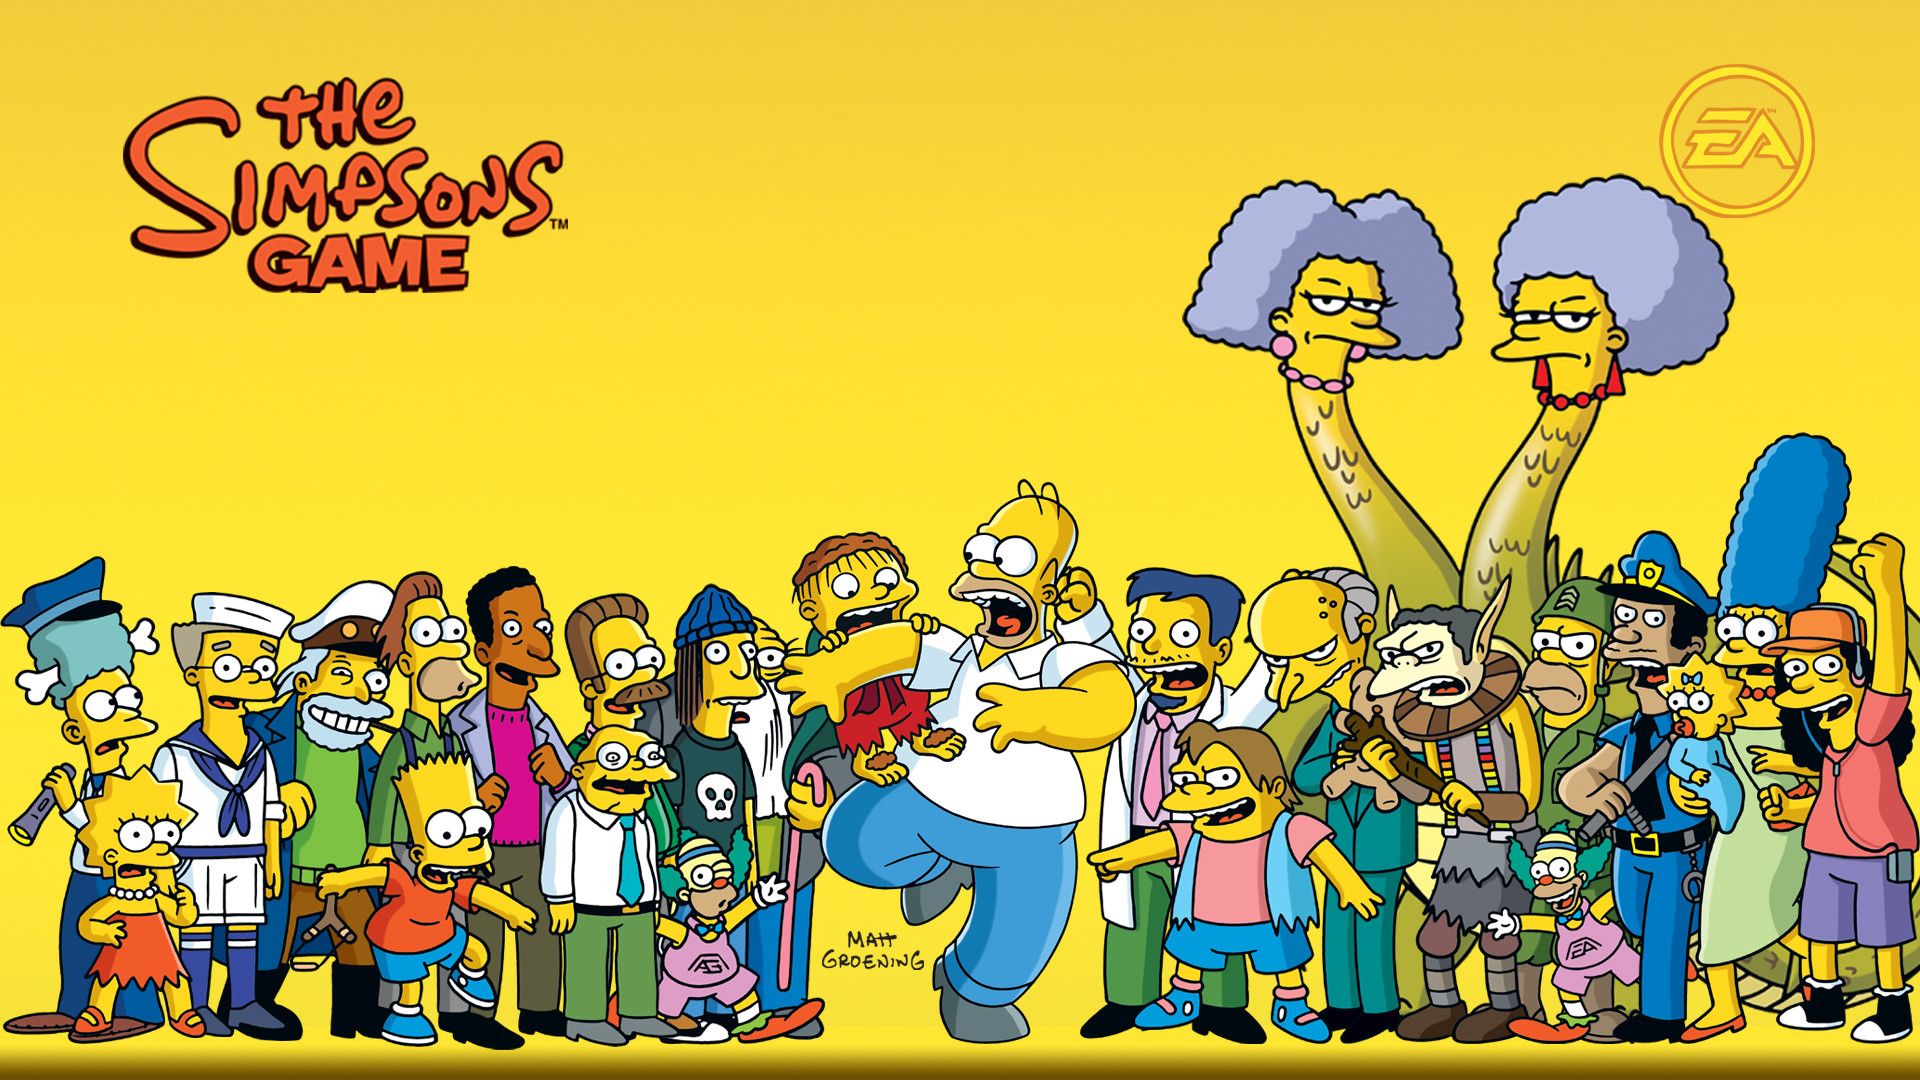 The Simpsons Game wallpaper 1920x1200 - The Simpsons